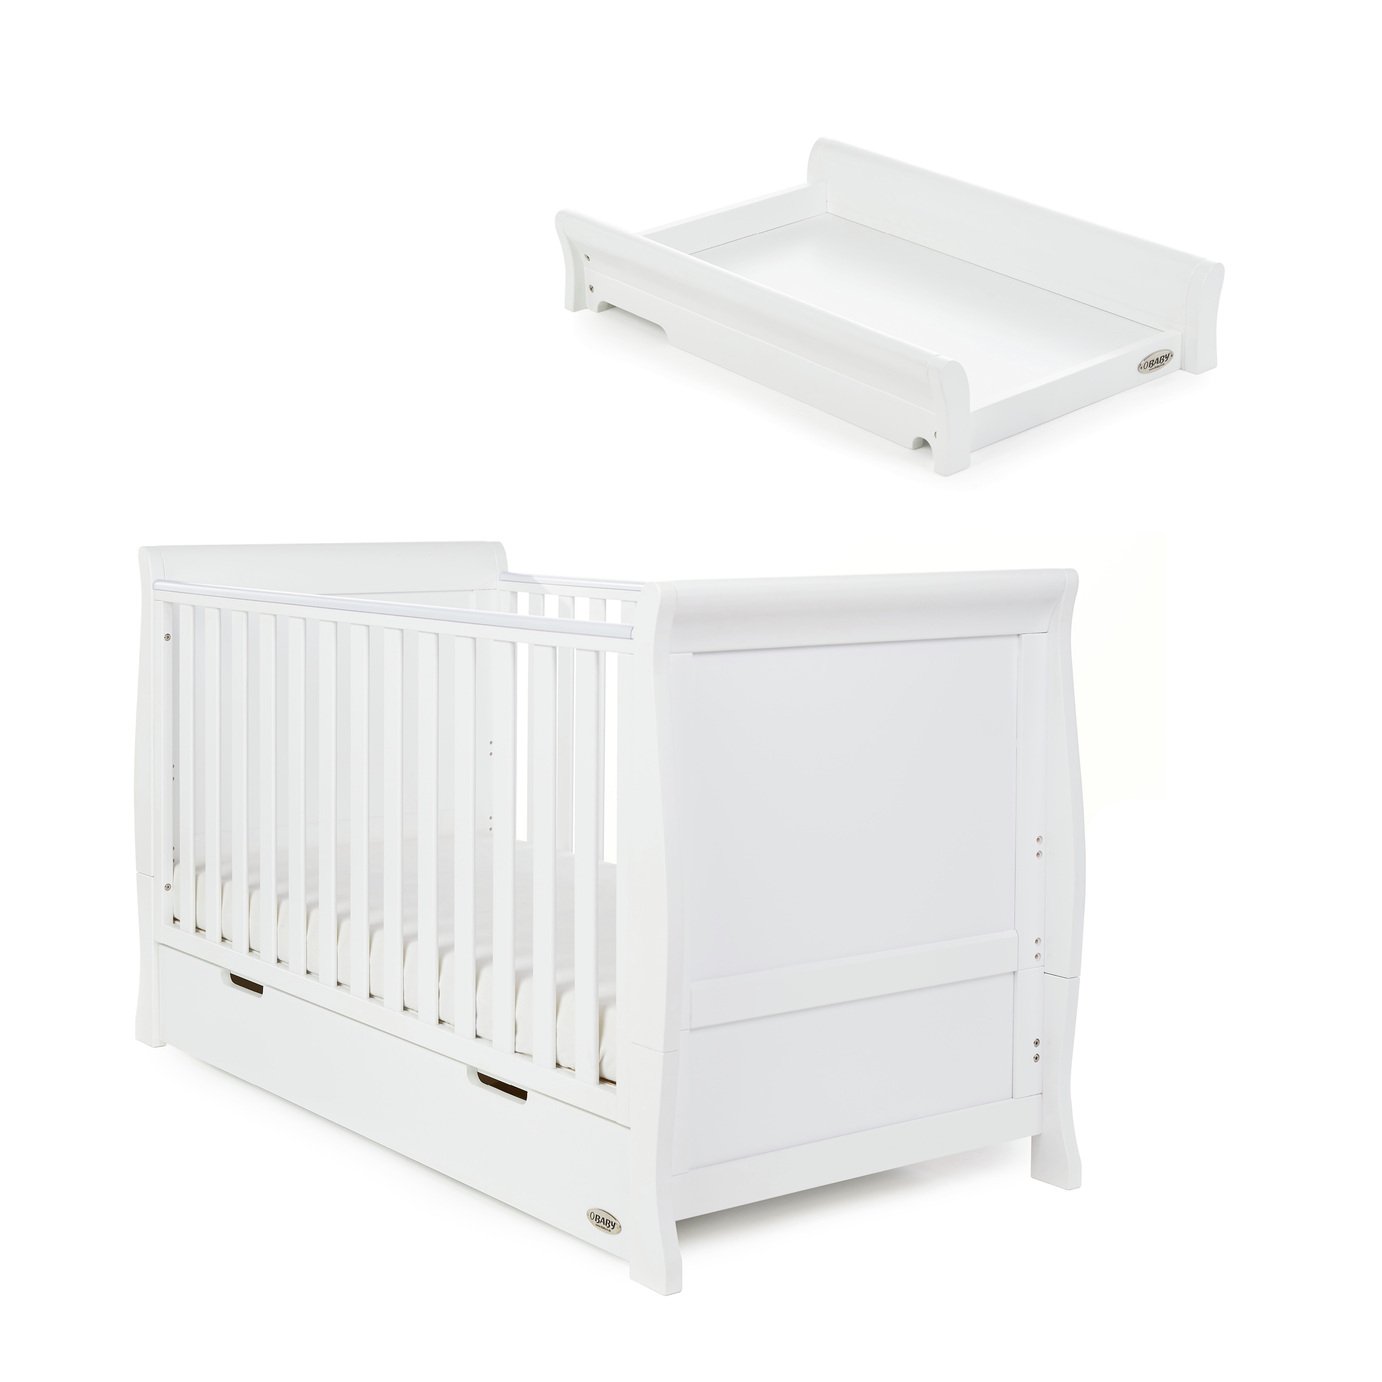 Obaby Stamford Classic Sleigh Cot Bed & Top Changer Review